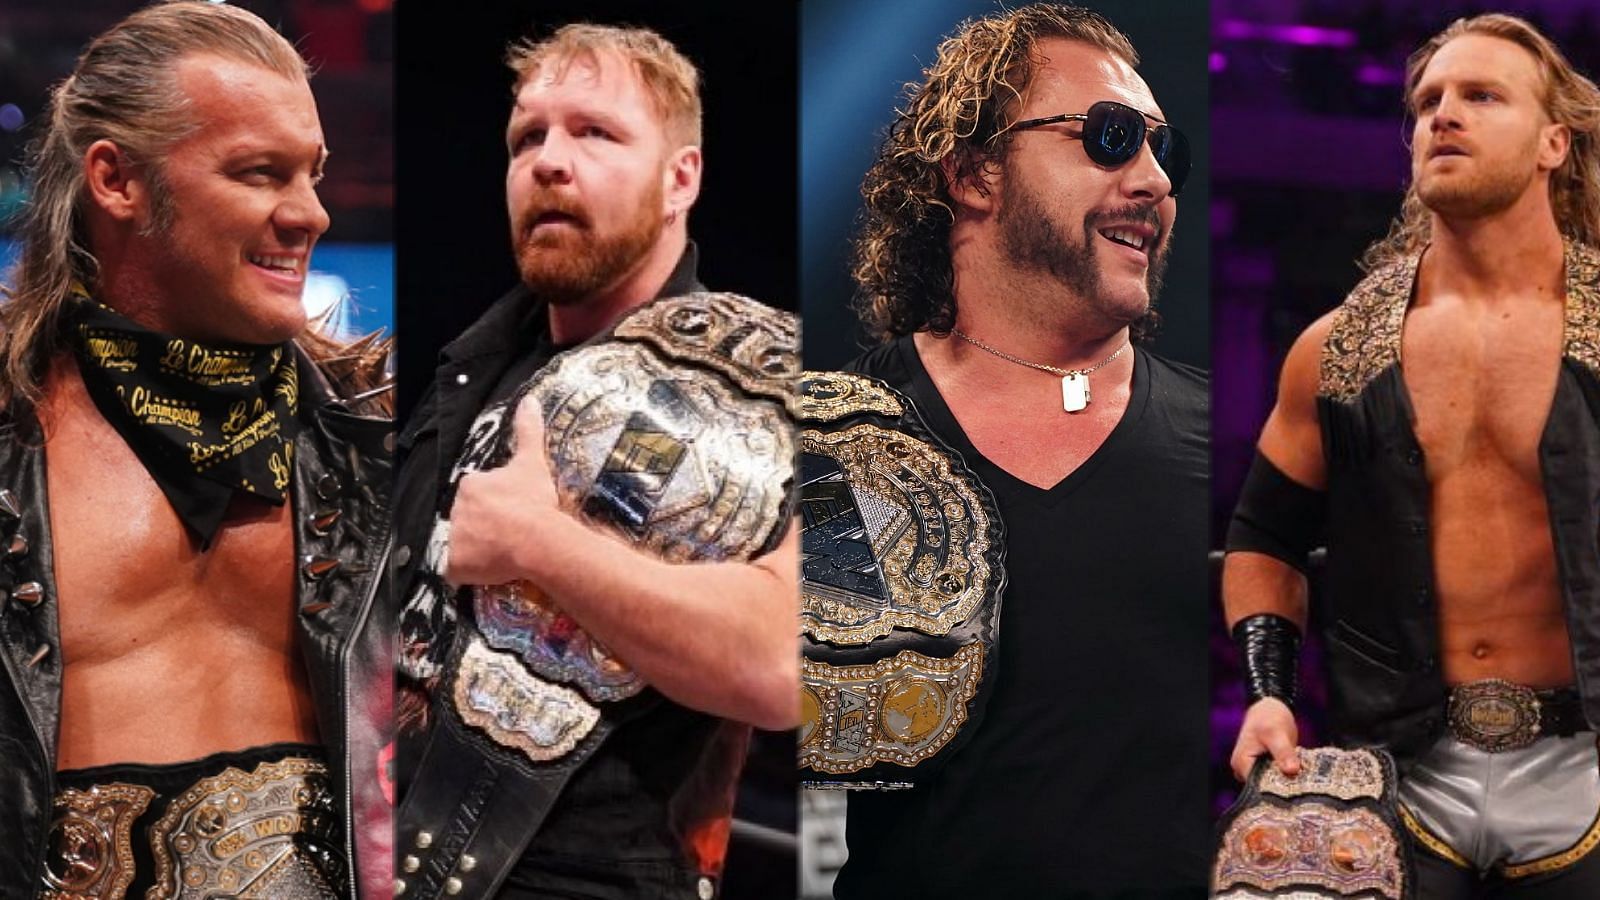 Moxley is the second AEW World Champion in history.